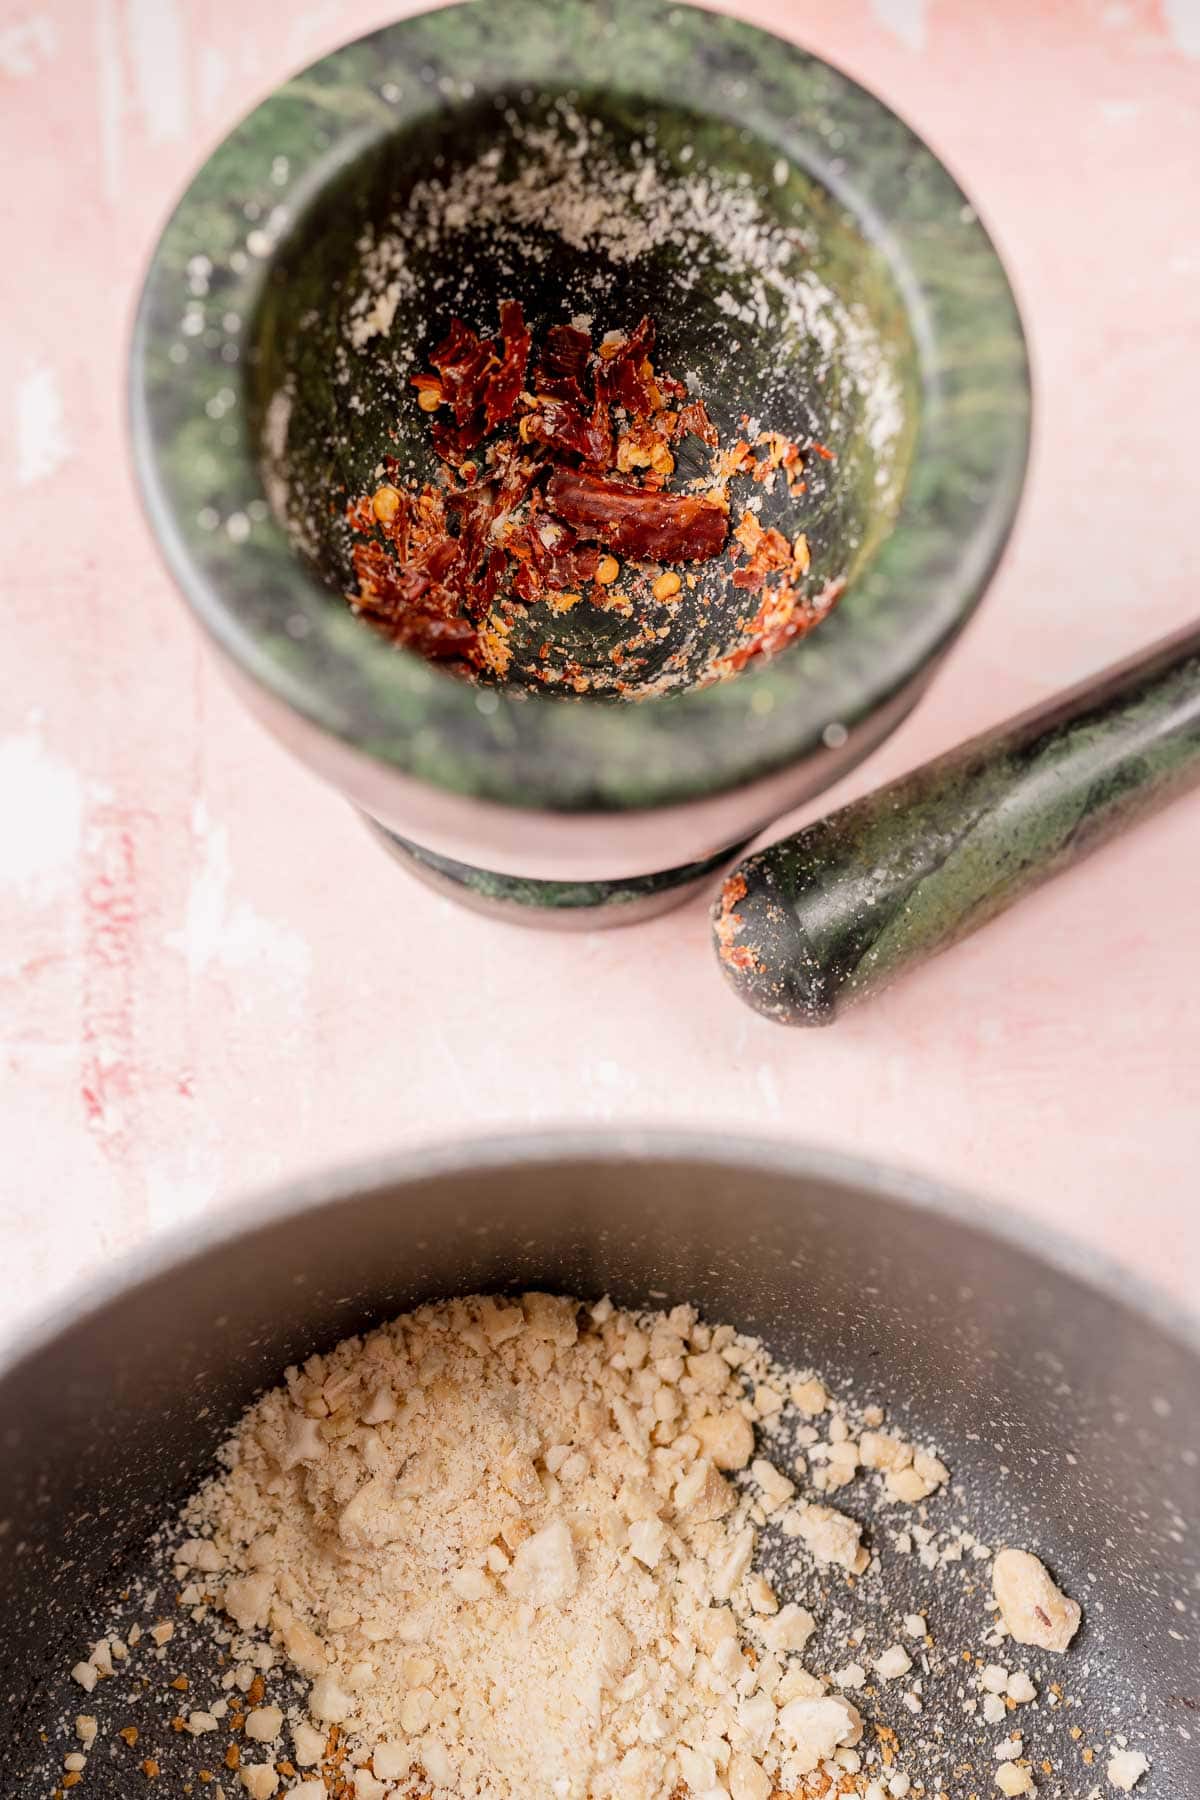 A mortar and pestle filled with crushed dried red chiles.